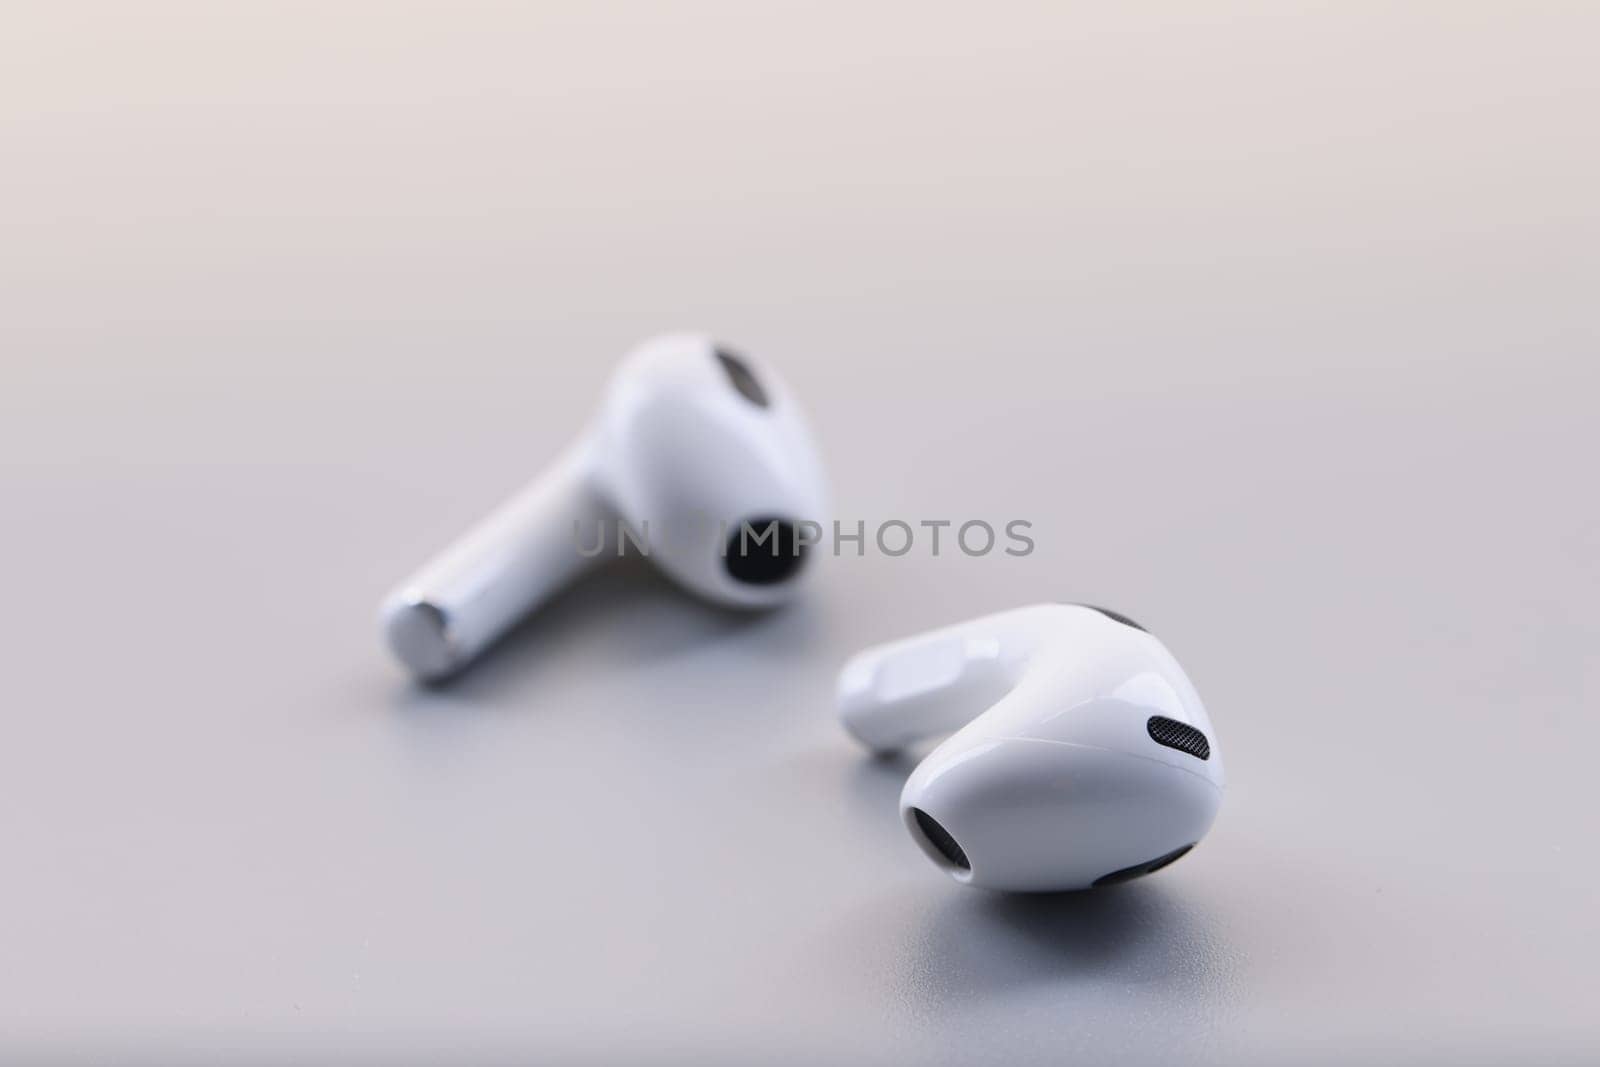 Wireless white stylish bluetooth headphones on gray background. Headset for listening to music